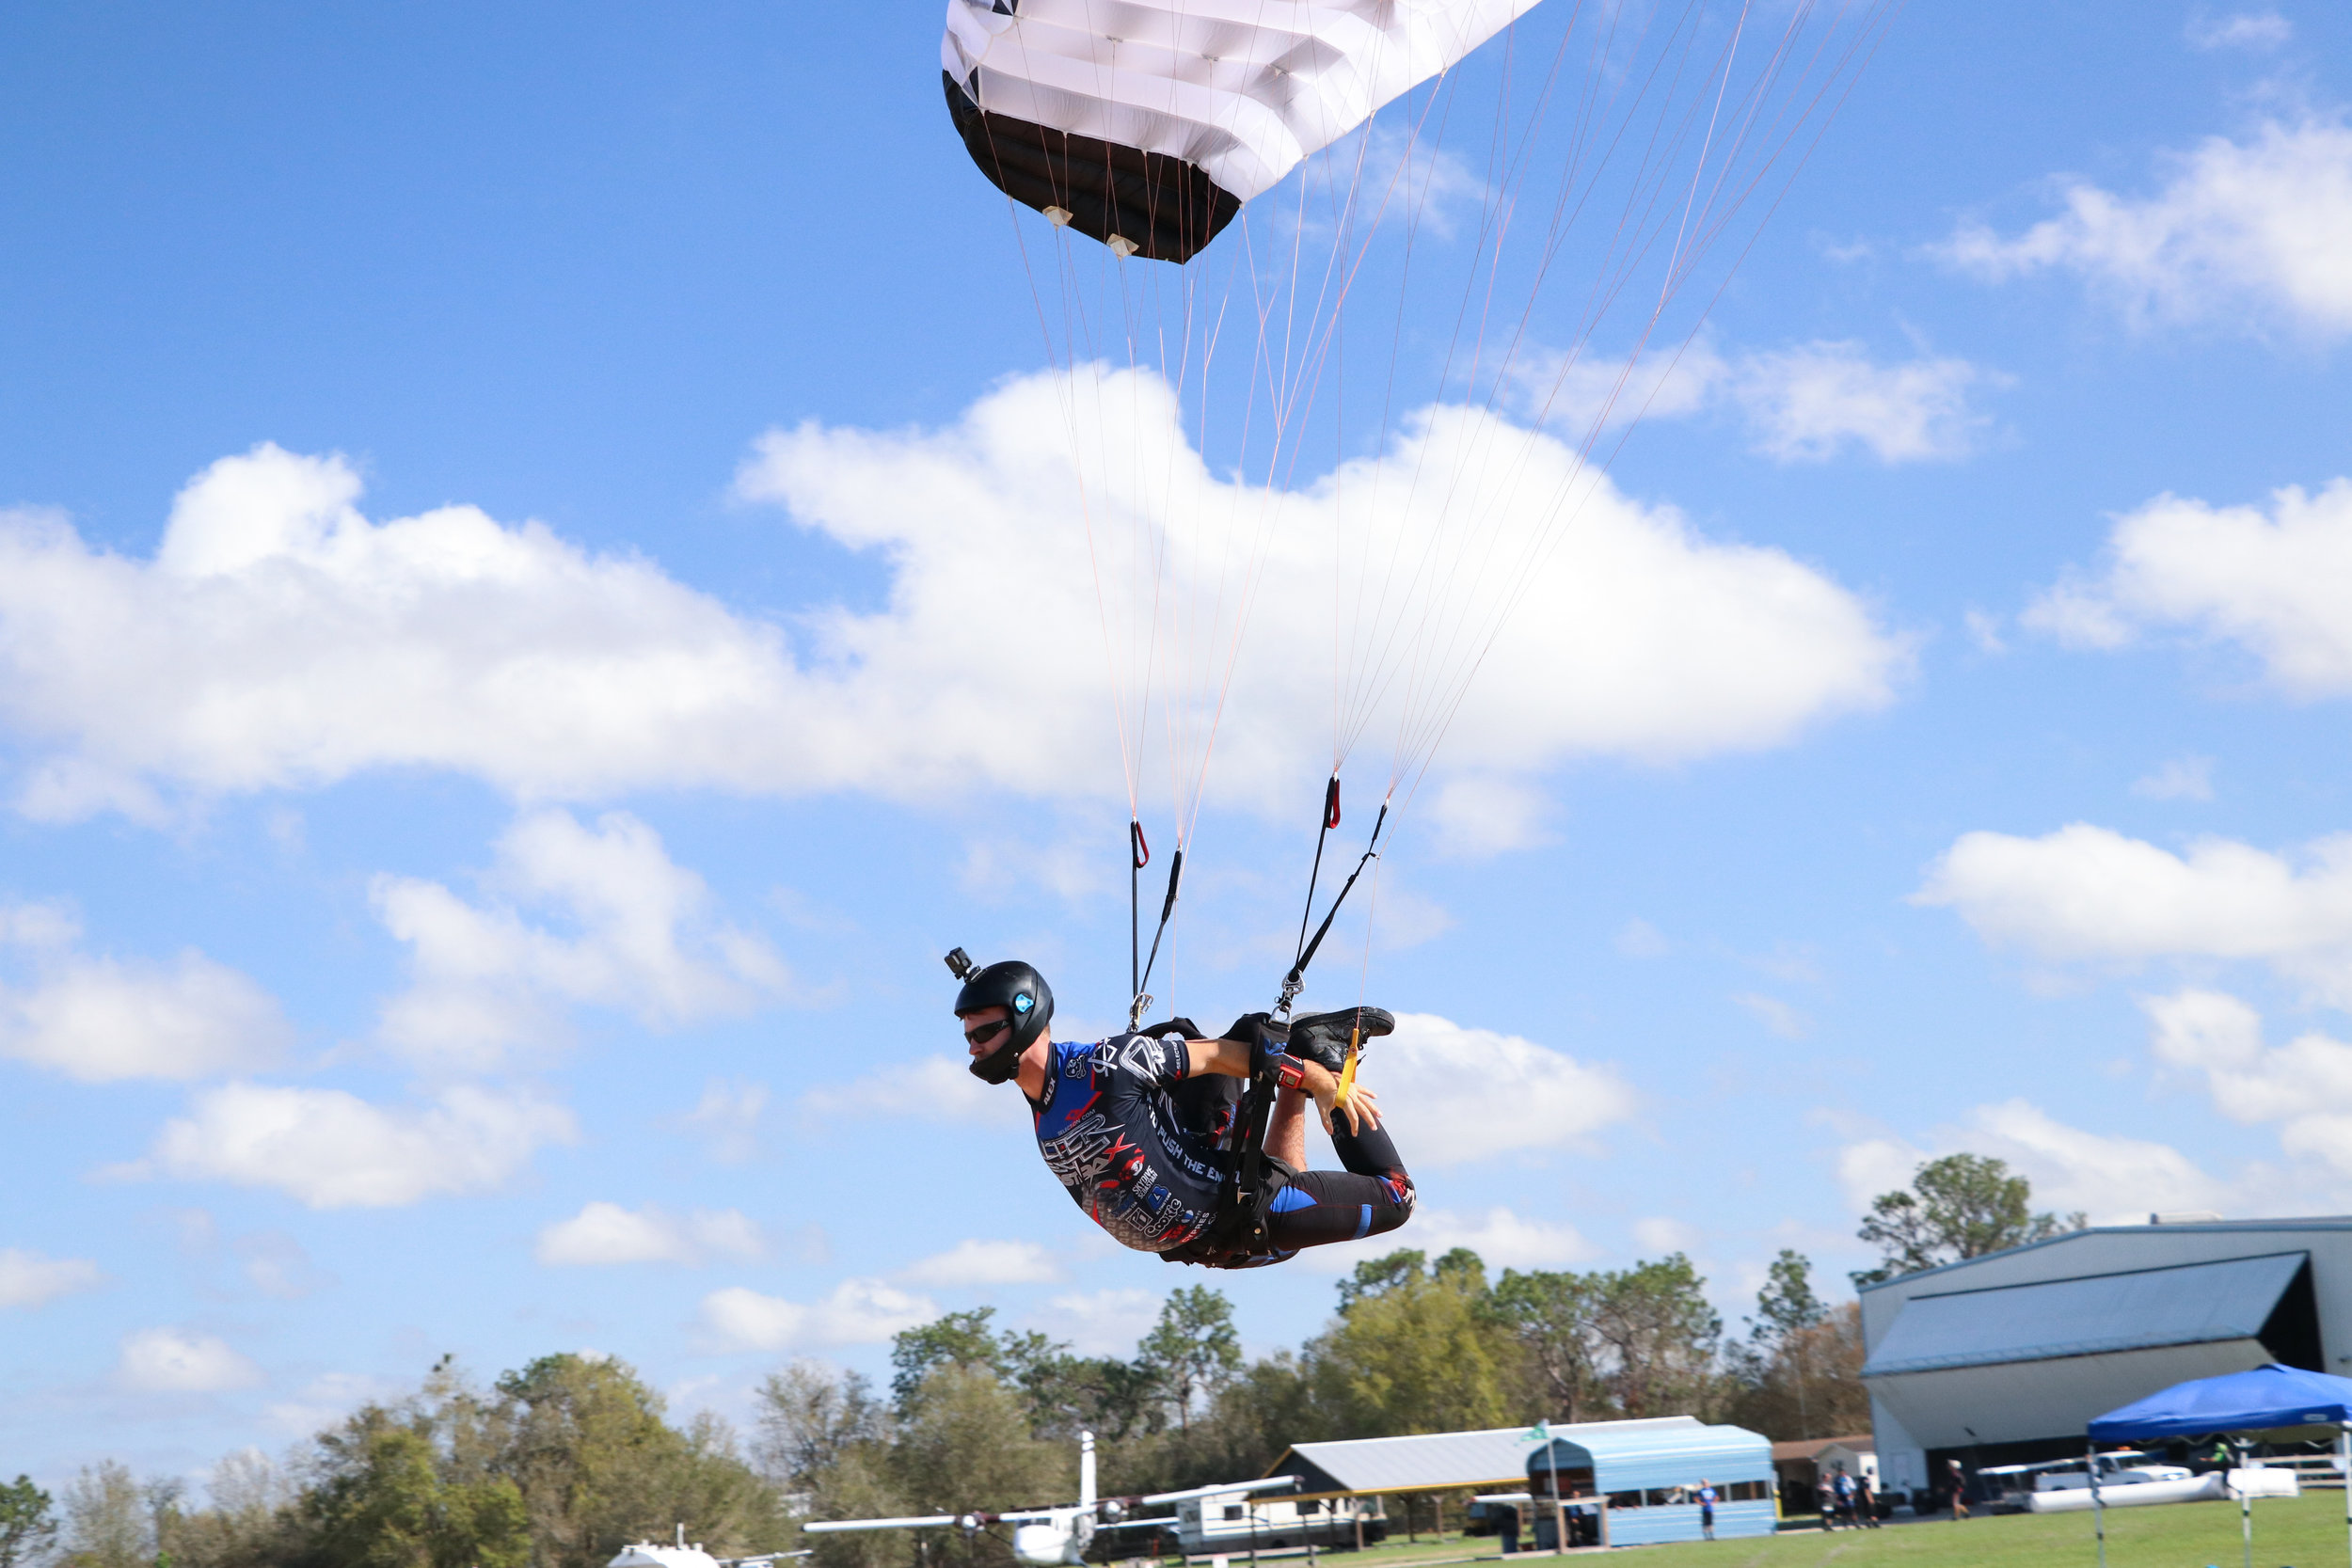 High-Kick-Photography-Skydiving-Canopy-Piloting-Swoop-High-Performance-Parachute-Skydive-City-Zephyrhills-ZHills-Florida-Sports-Active-Competition-LR-5.jpg